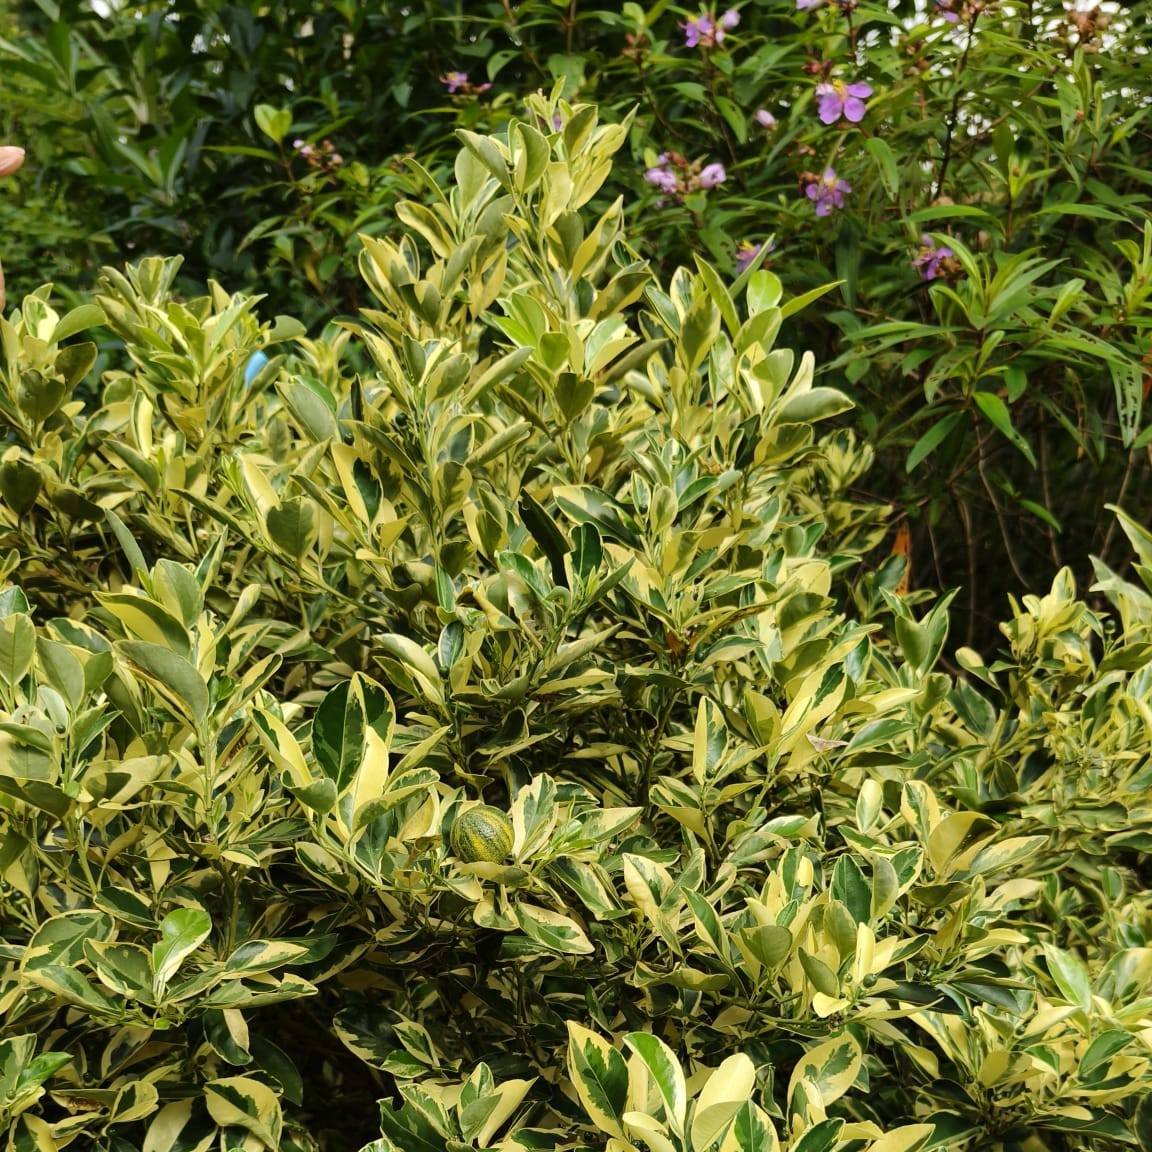 If you do not see clearly, you may mistake this plant for a ficus, but it is actually the variegated lime plant, scientifically known as Citrus &times; aurantiifolia (variegated). Time has swiftly passed, with a quarter of the year already behind us.